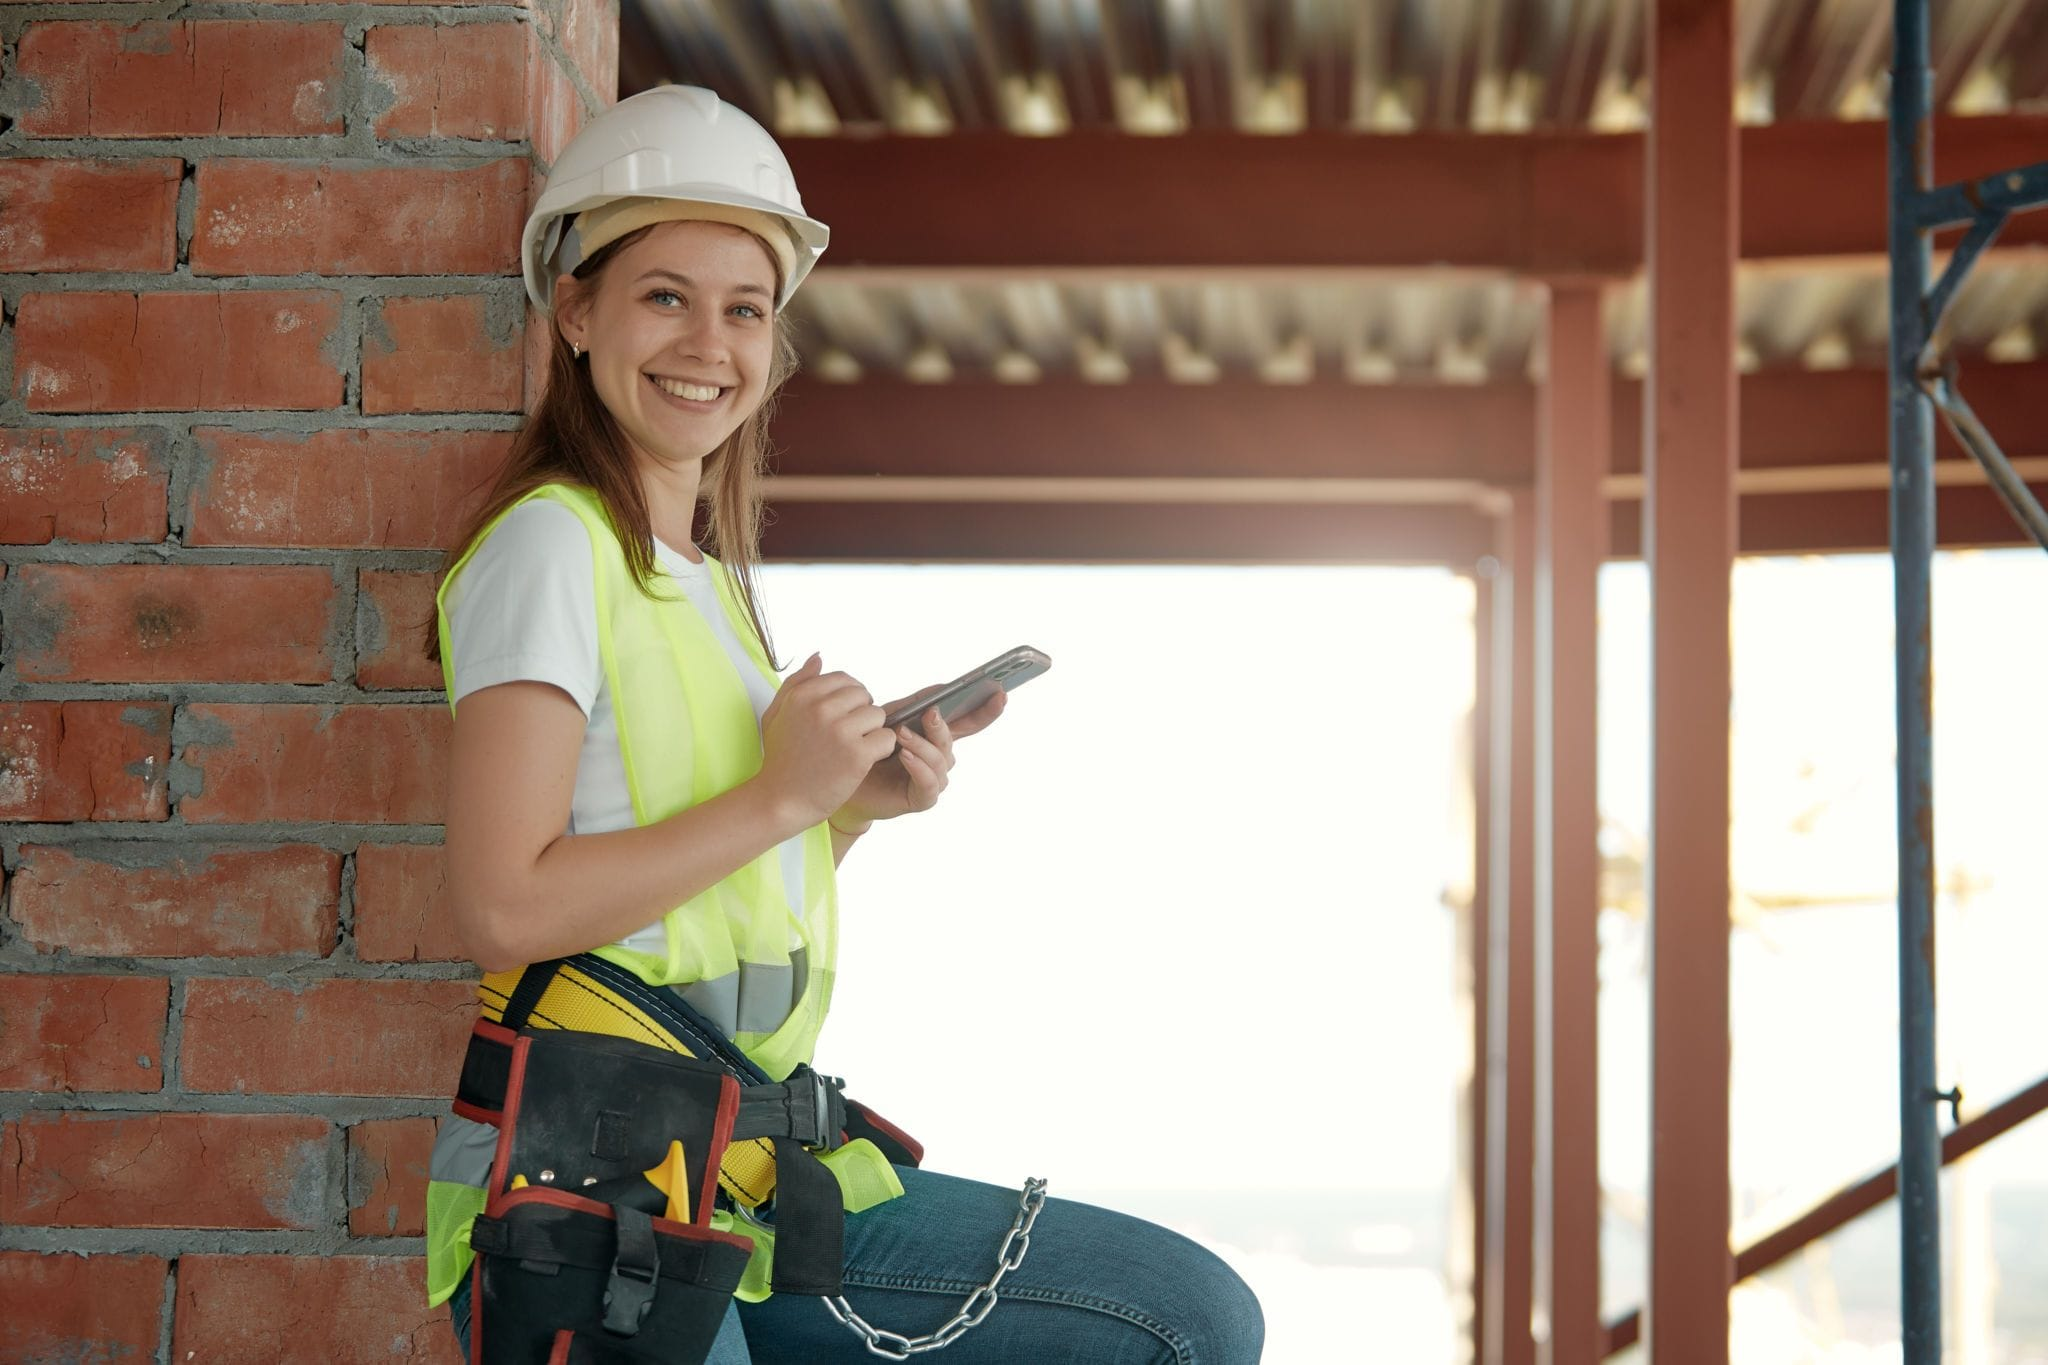 Women in the construction industry